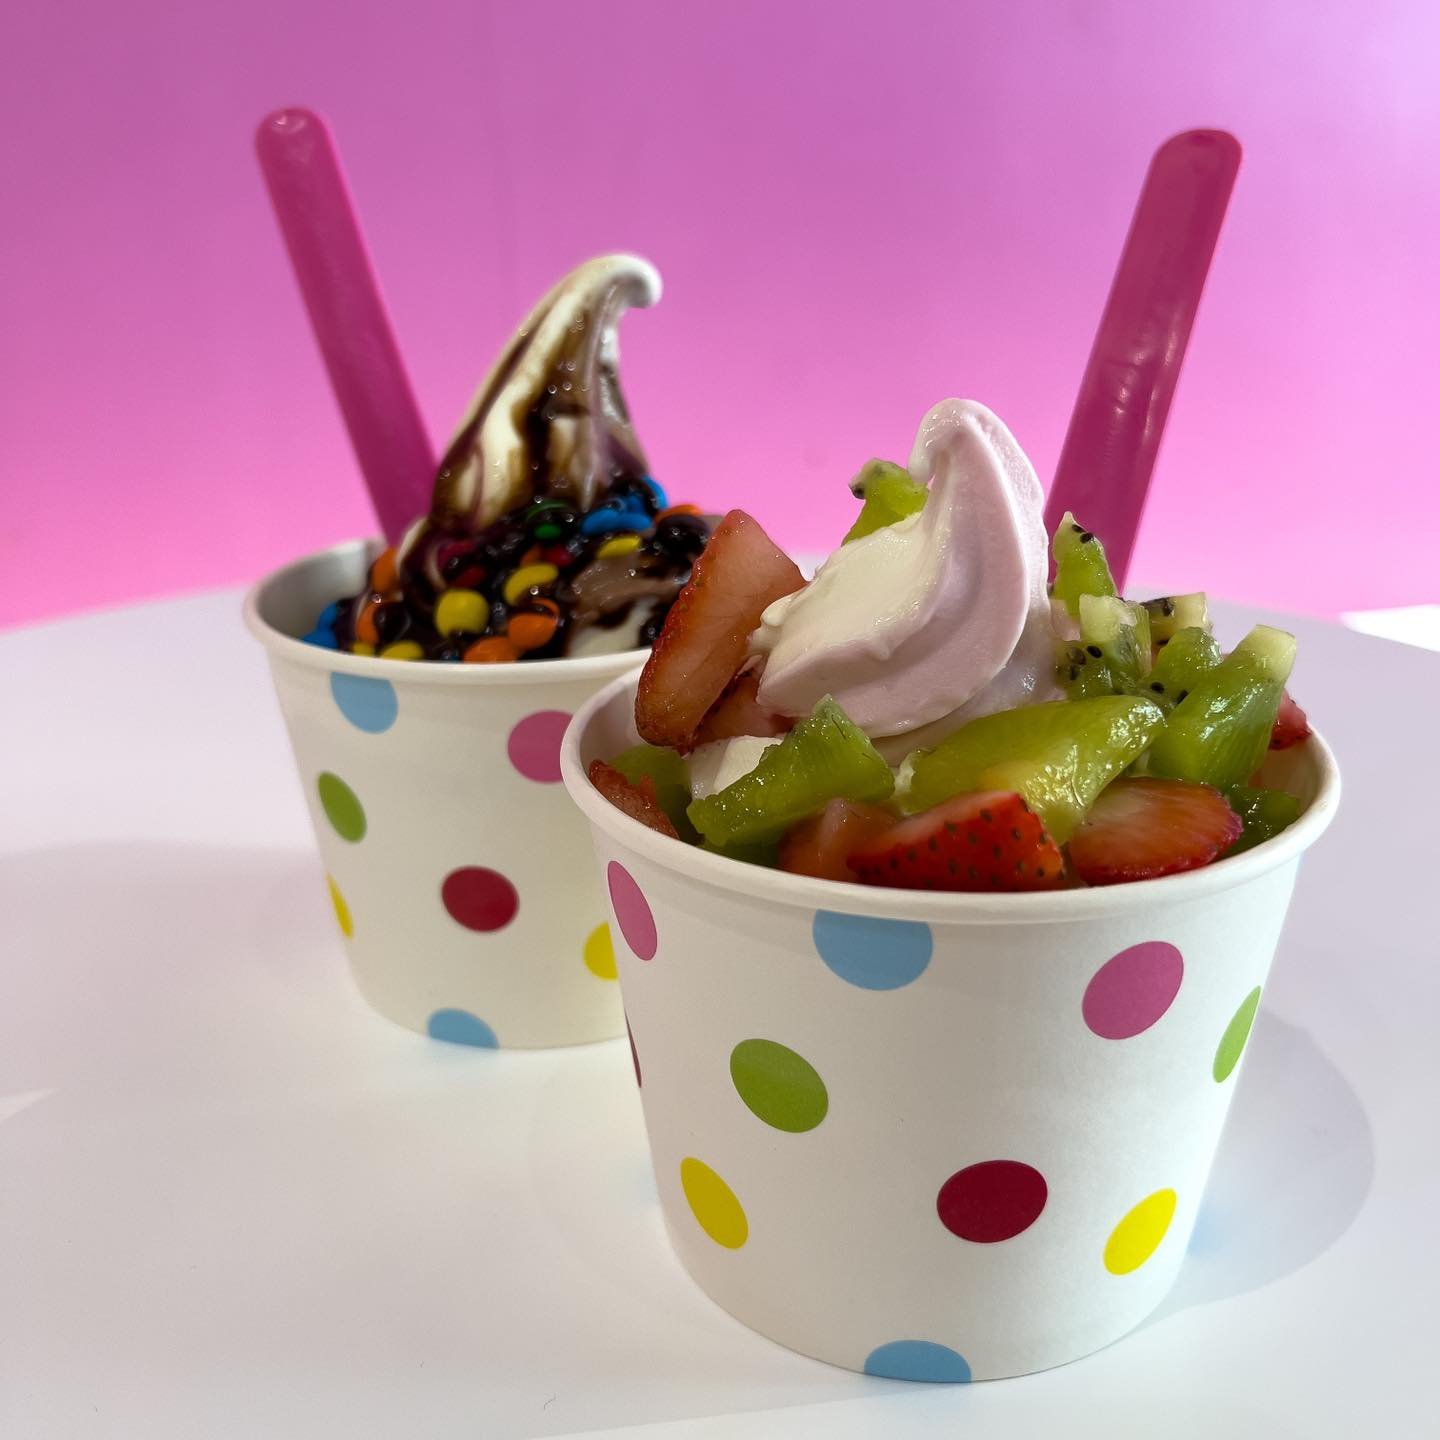 Sunshine and swirls on this terrific Tuesday! ☀️🍦 Grab your cup of happiness and enjoy the beautiful weather! #PerfectDayForFroyo #SunnySwirls #TreatYourselfTuesday #froyostl